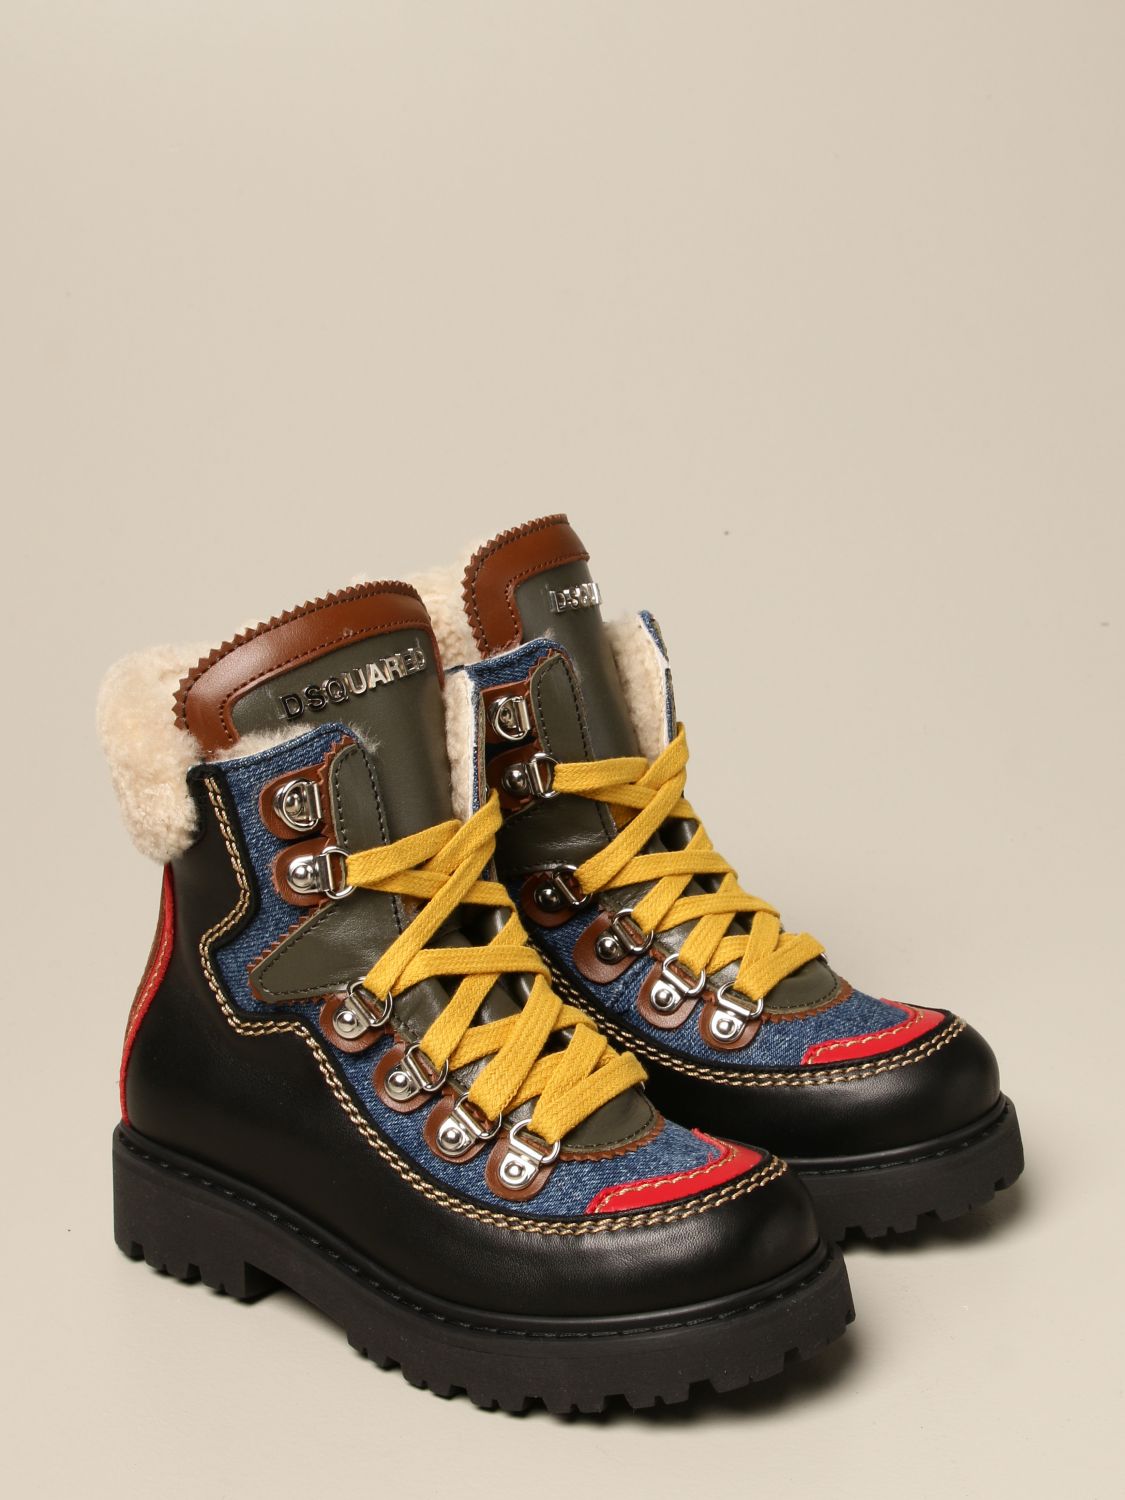 Dsquared2 Junior Outlet: trekking boots in leather and denim - Black ...